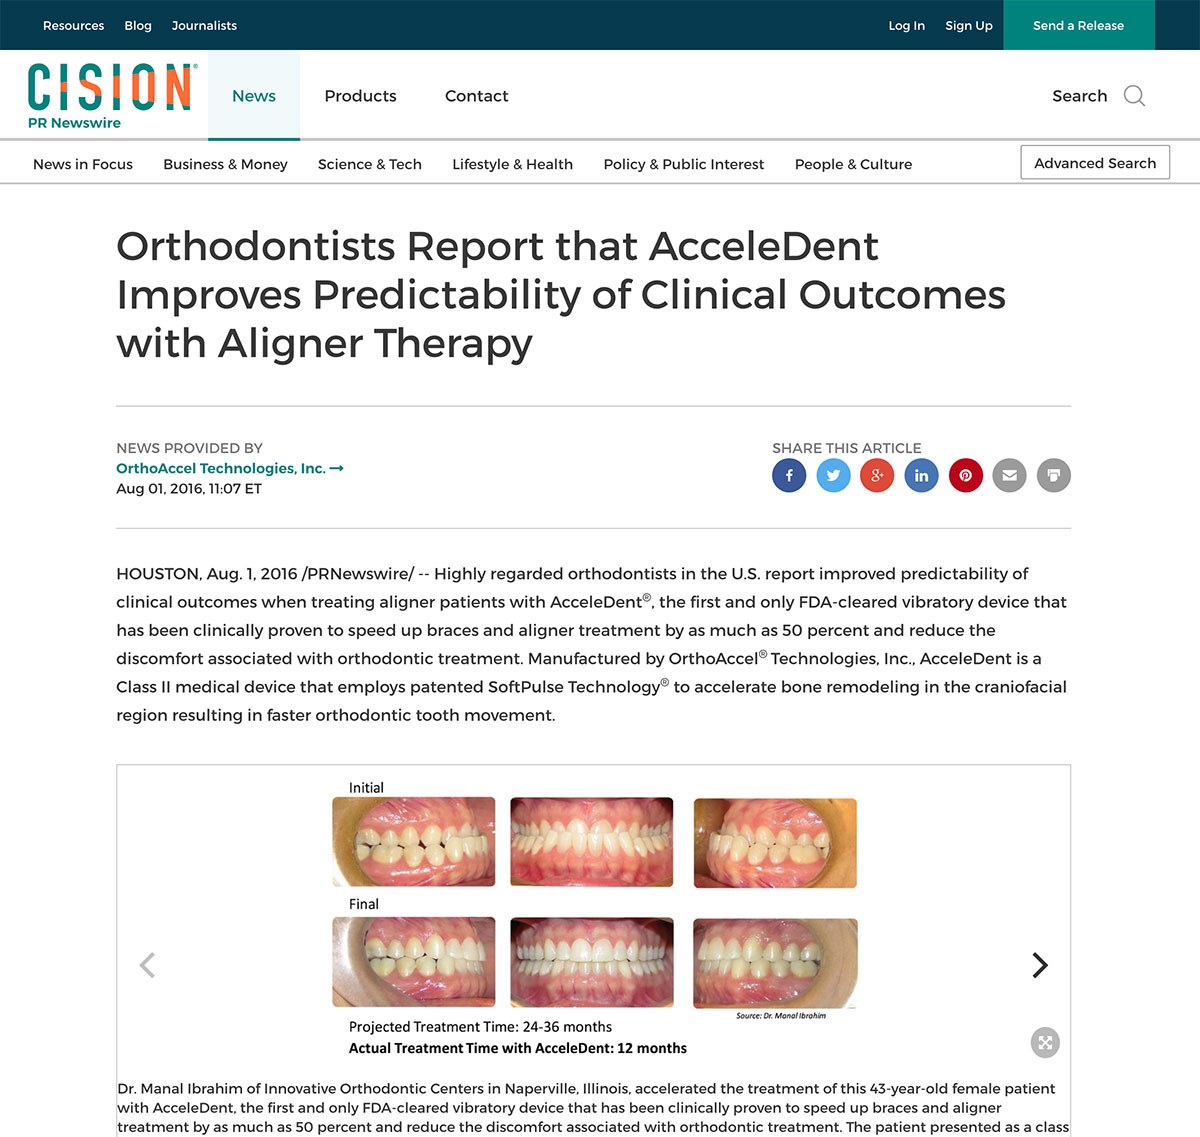 AcceleDent-Improves-Predictability-of-Clinical-Outcomes-with-Aligner-Therapy